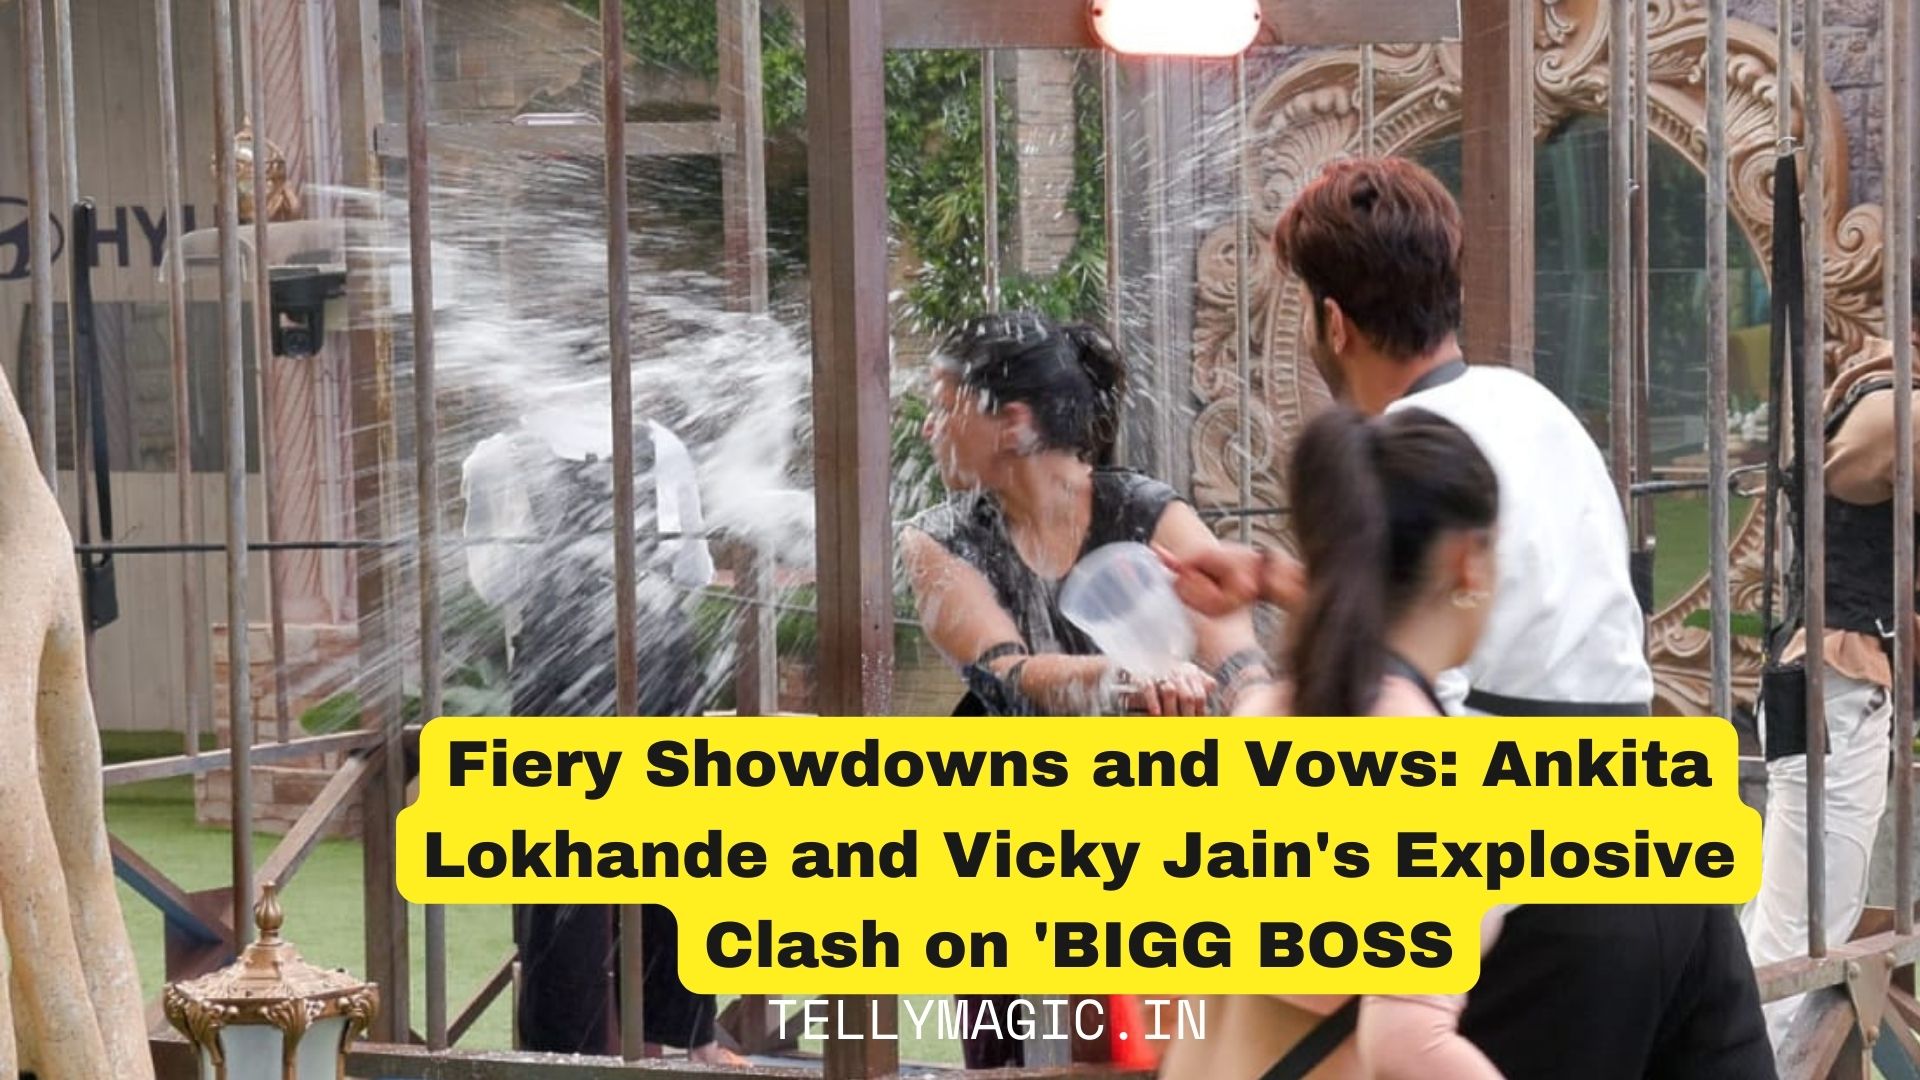 Fiery Showdowns and Vows: Ankita Lokhande and Vicky Jain’s Explosive Clash on ‘BIGG BOSS